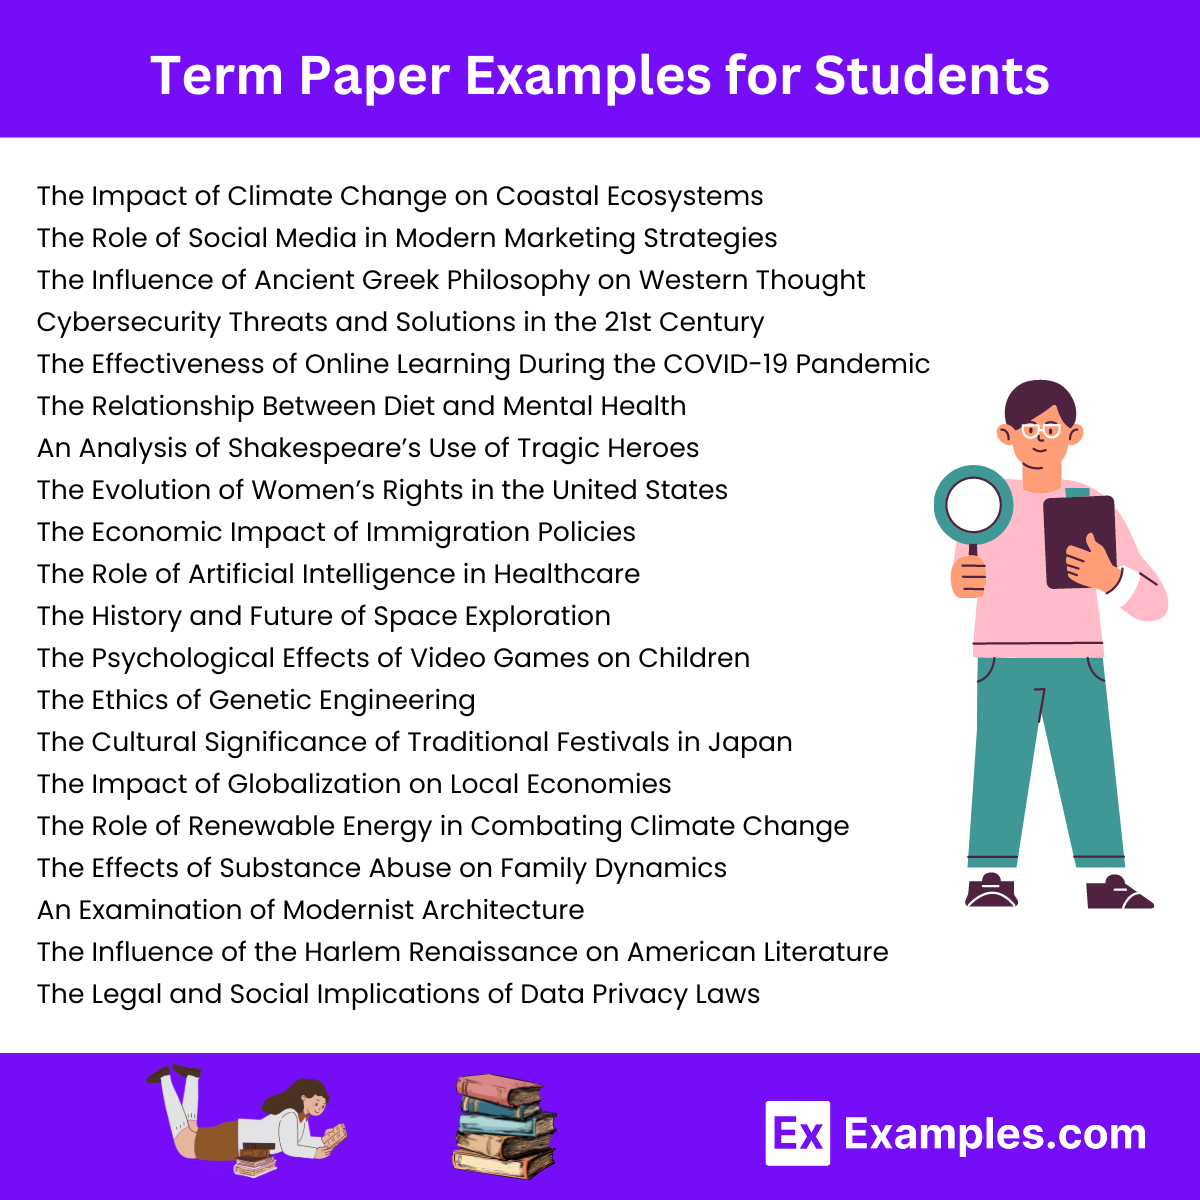 Term Paper Examples for Students